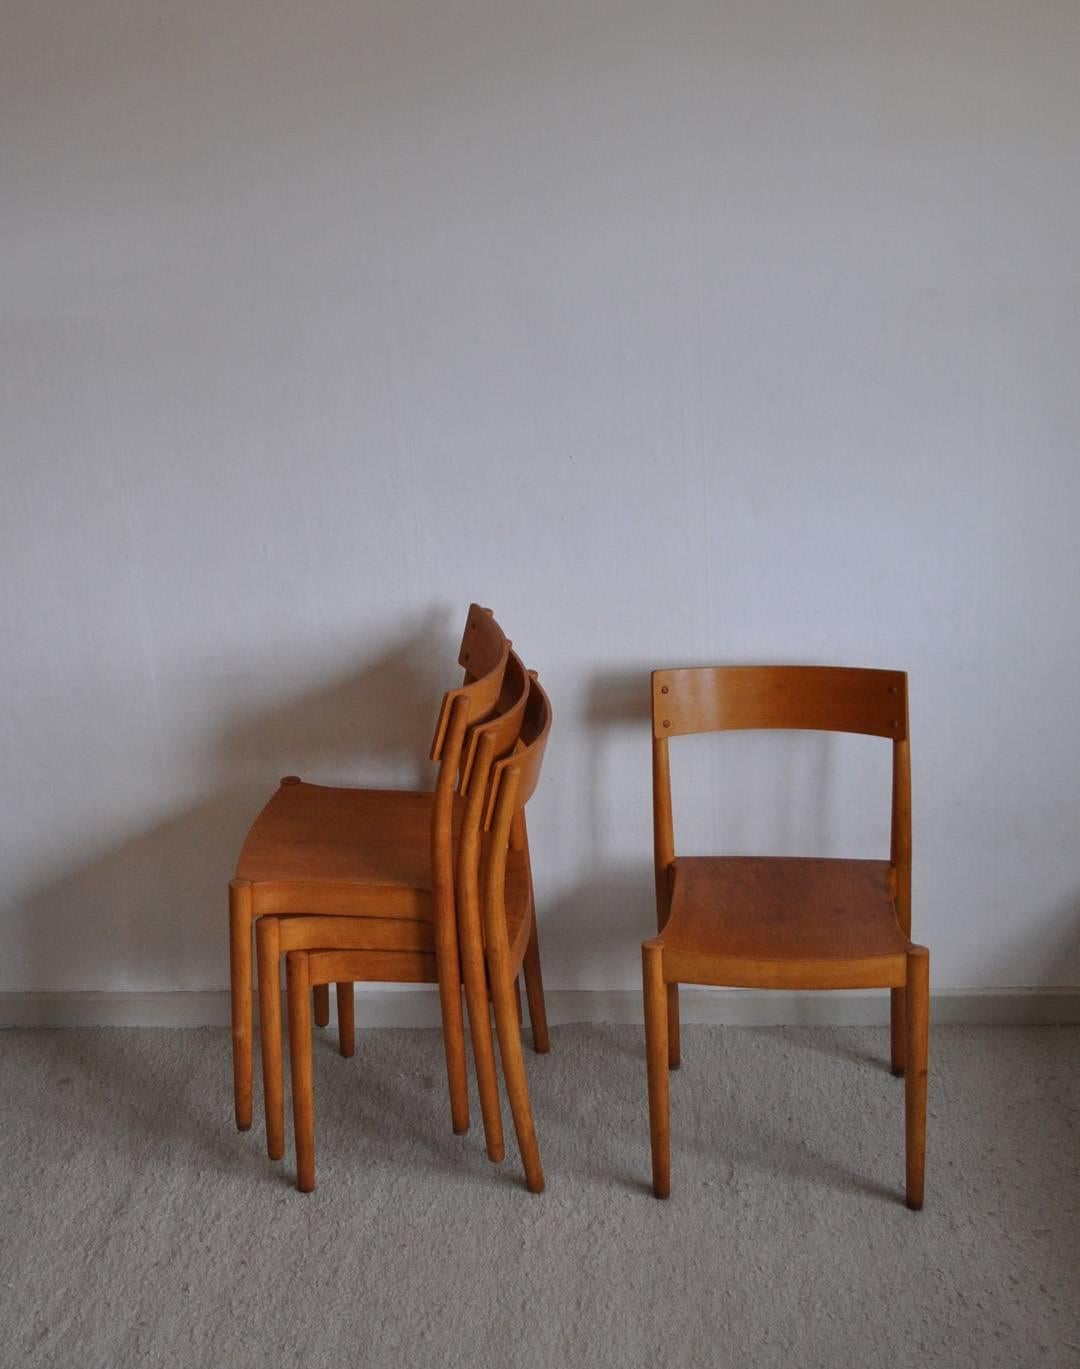 stakable chairs